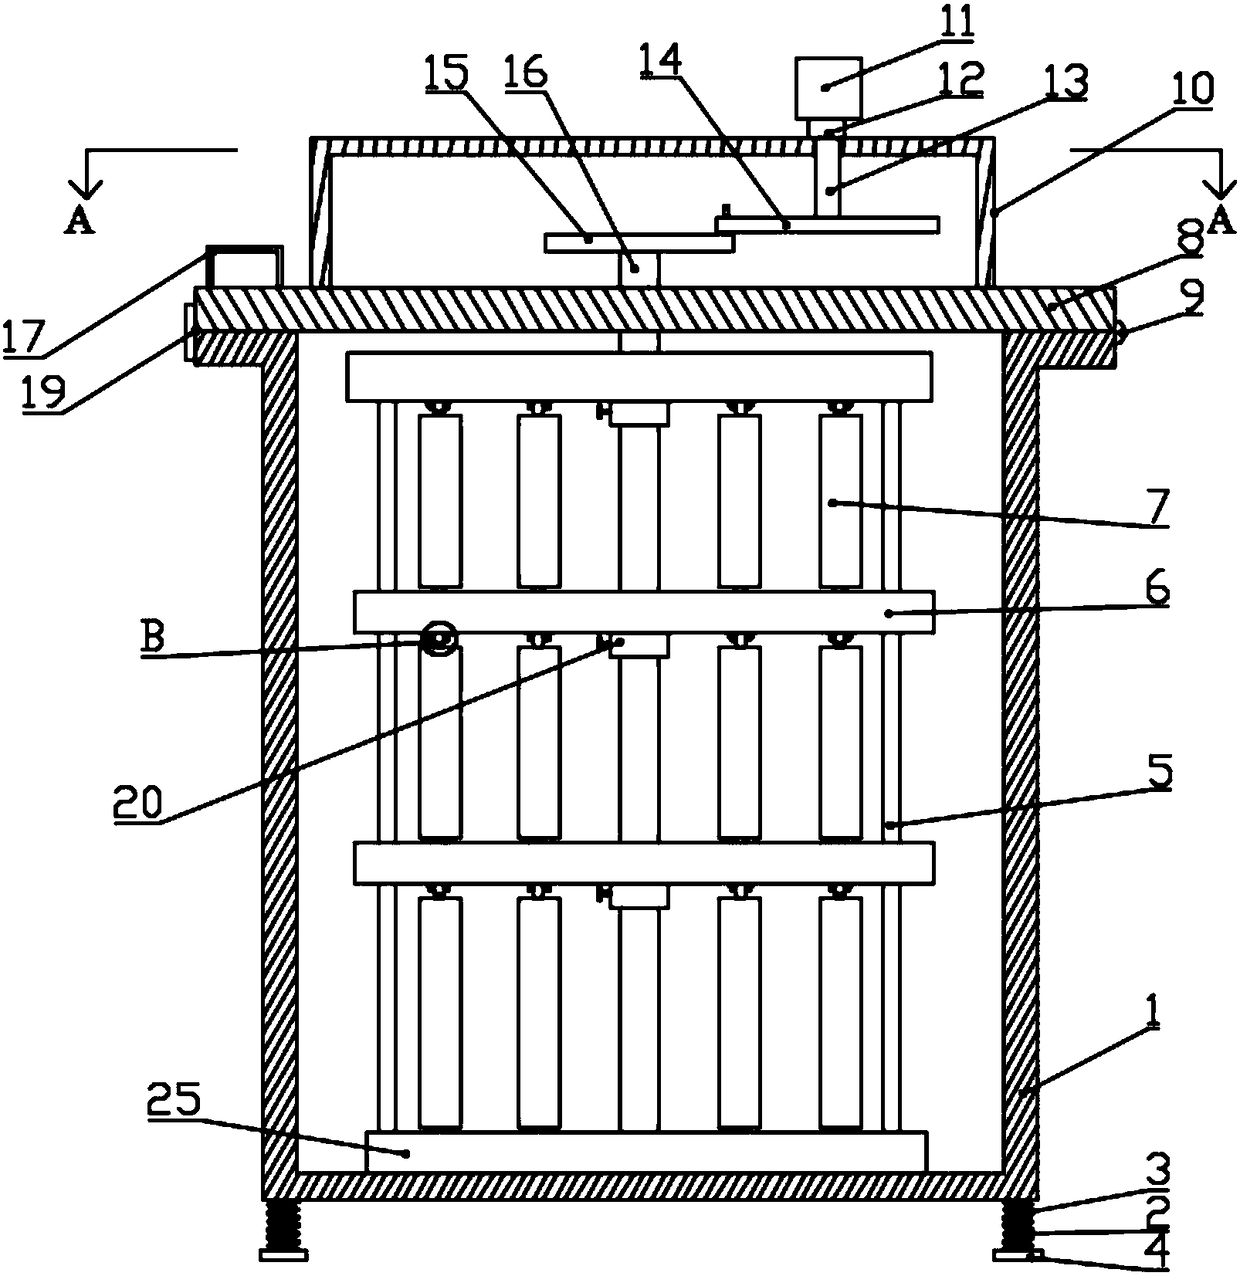 Electrical equipment heat treatment device